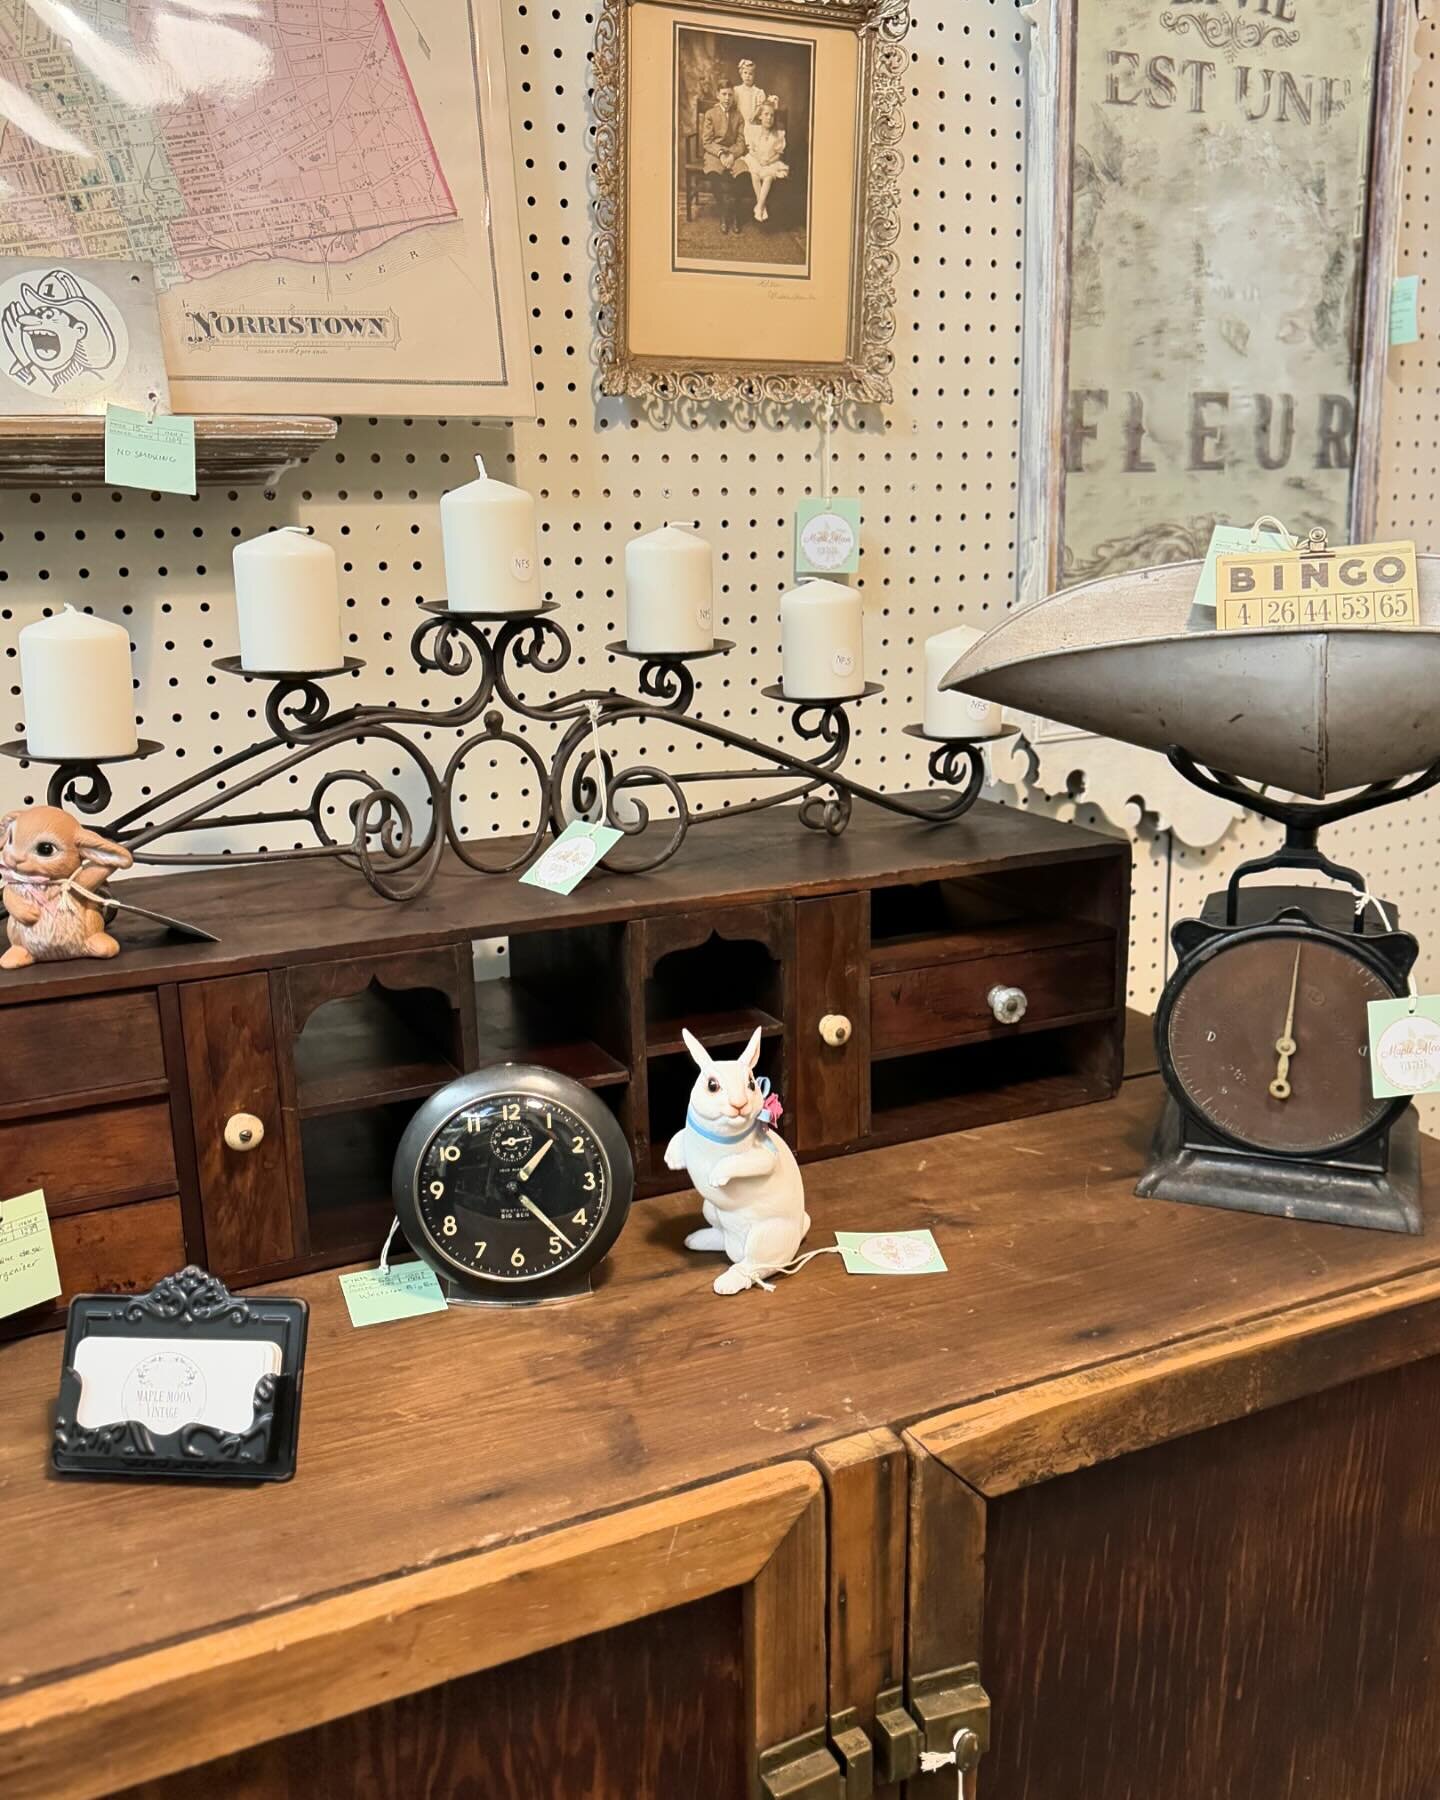 I&rsquo;m set up in booth 145 @zionsvilleantiquemall 😊 More antique and vintage treasures to come! 
Located at 7567 Chestnut St, Rte 100 in Zionsville PA. Open Mo, Tue, Thu, Fri-Sat 10-6, Sun 11-5.